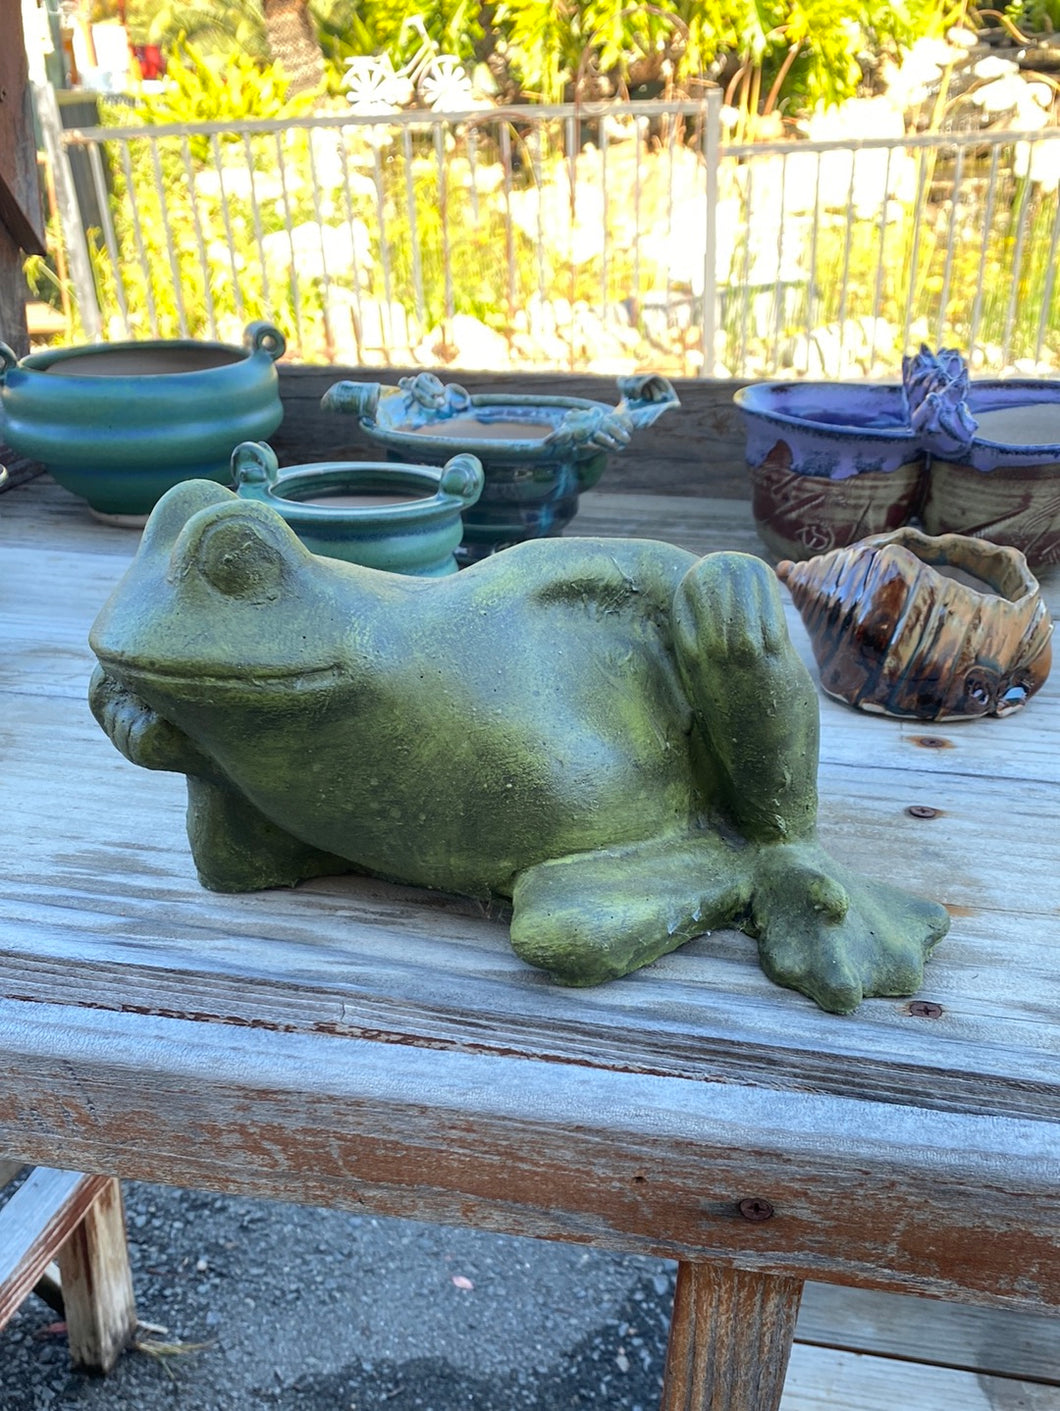 Thinking Frog Statue